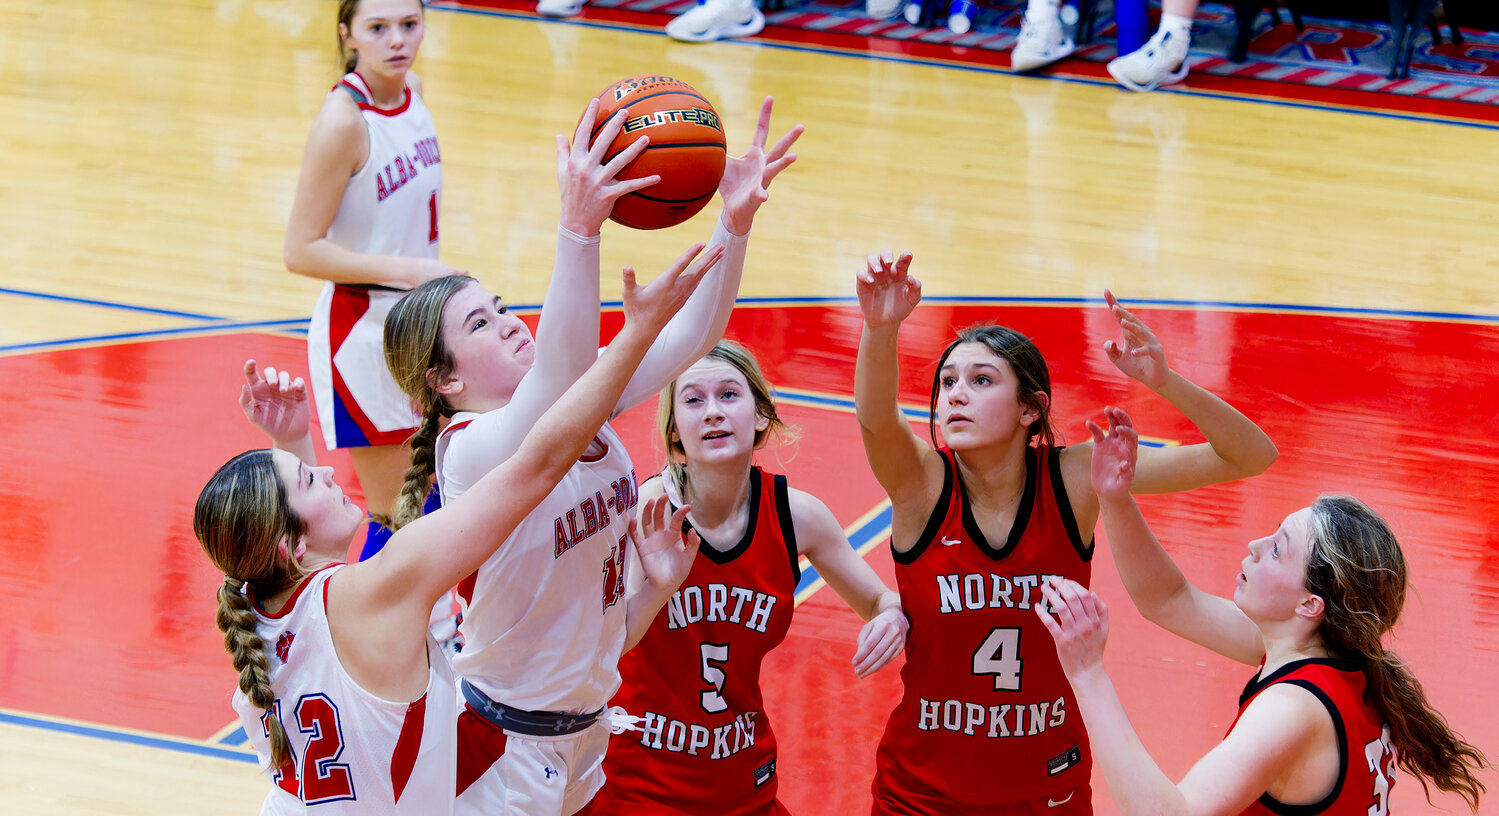 Lainey Teel battles for the rebound.